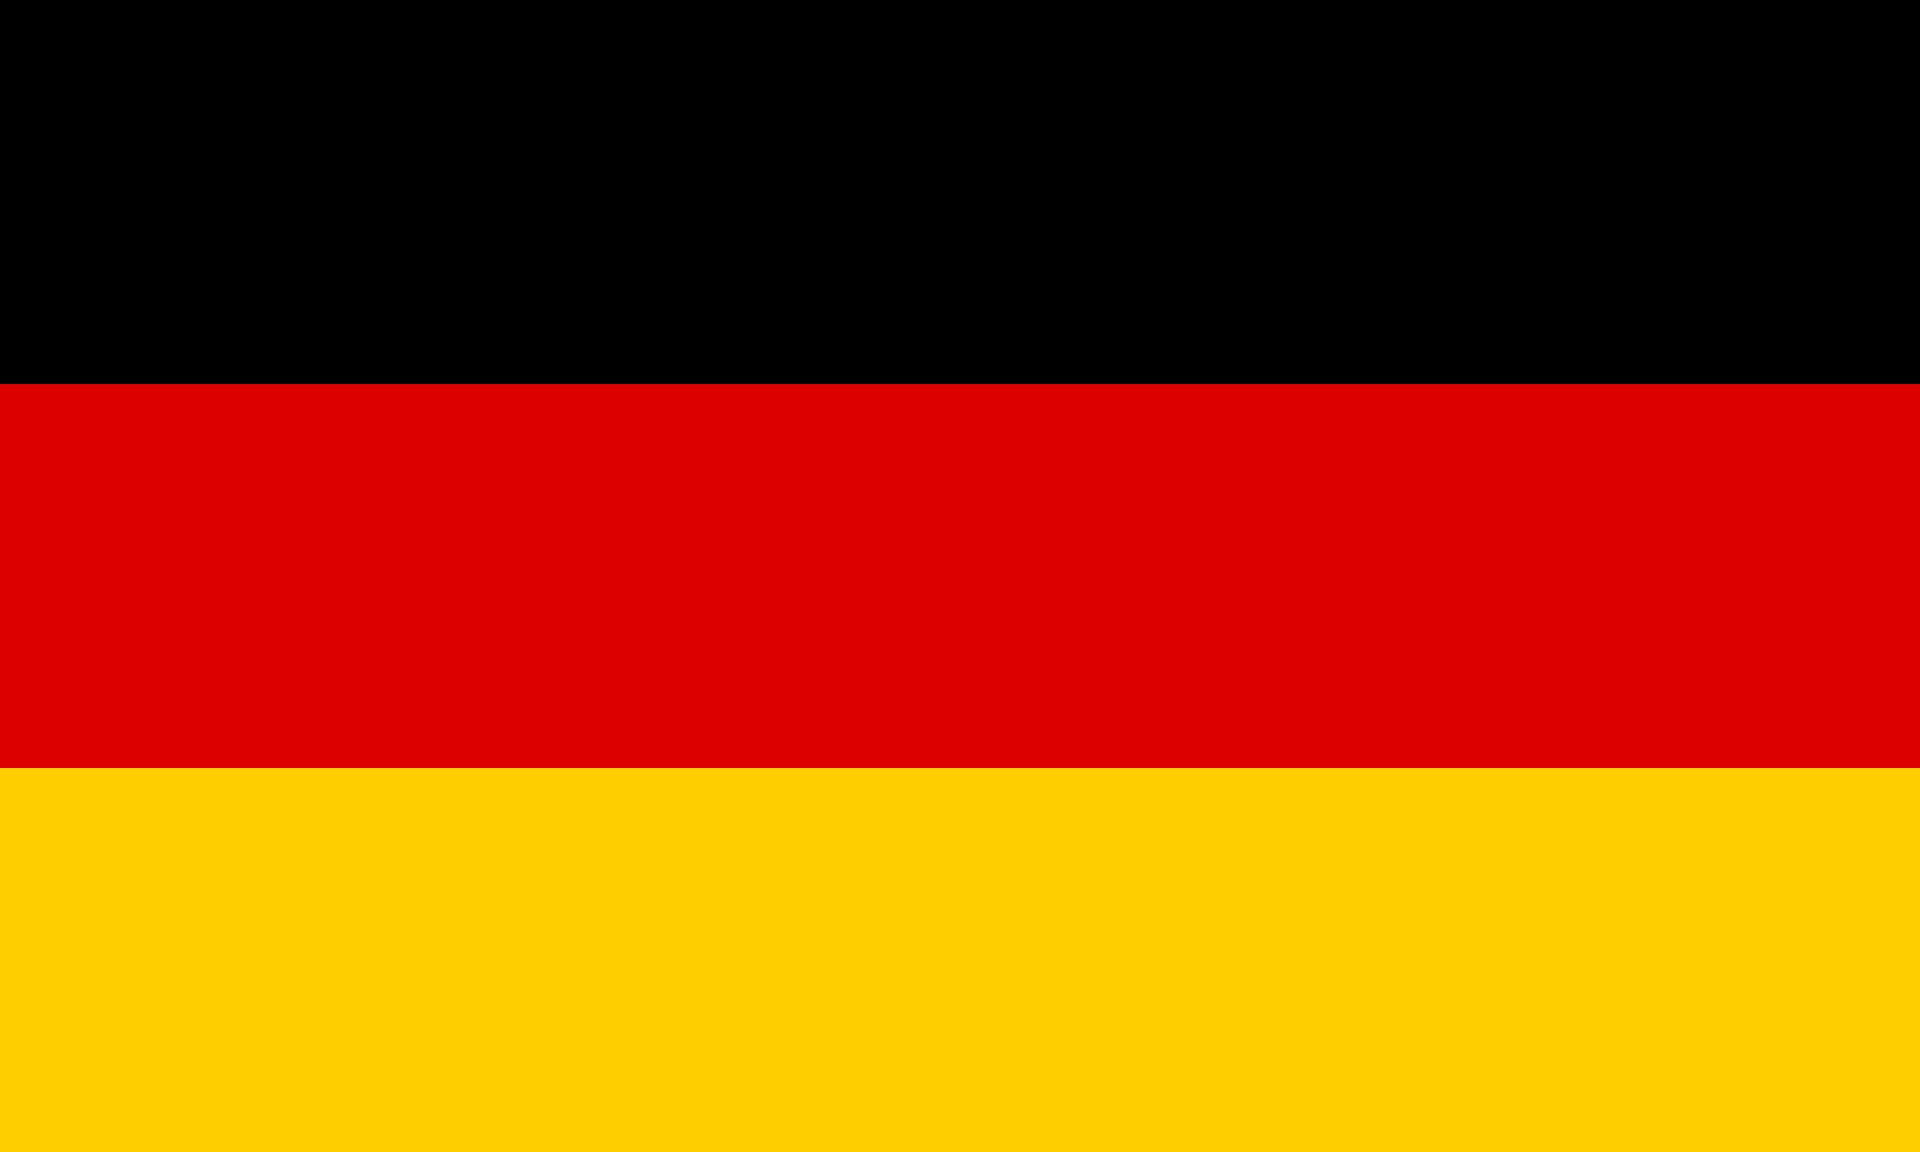 EGBA: Don’t let overly restrictive measures jeopardise Germany’s new gambling regulations